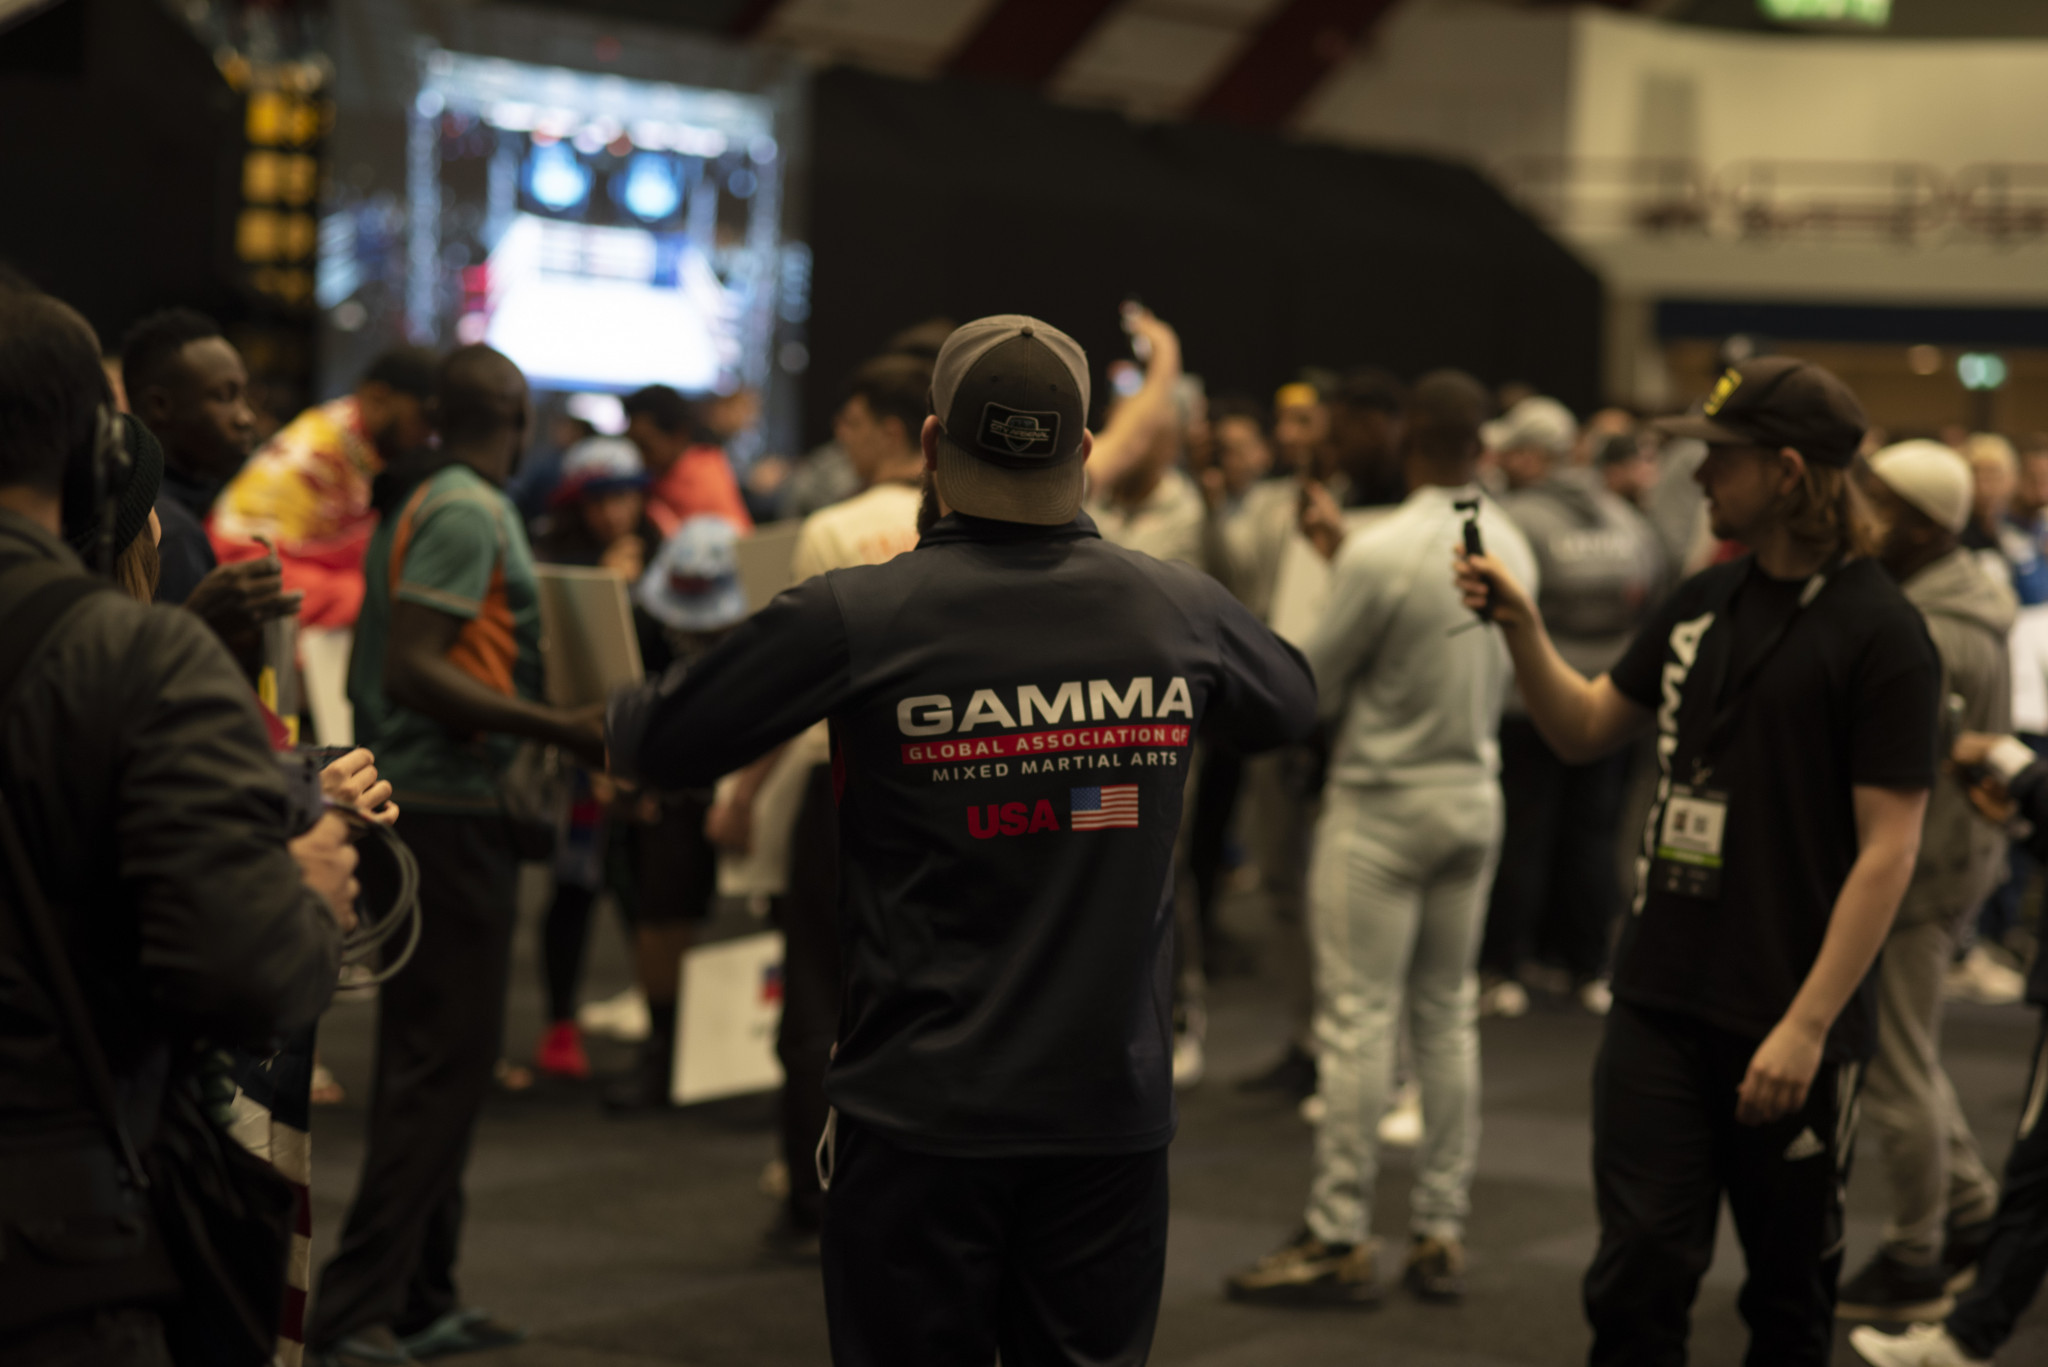 GAMMA has bolstered its communications offering by entering into a partnership with Fight Camp Media ©GAMMA